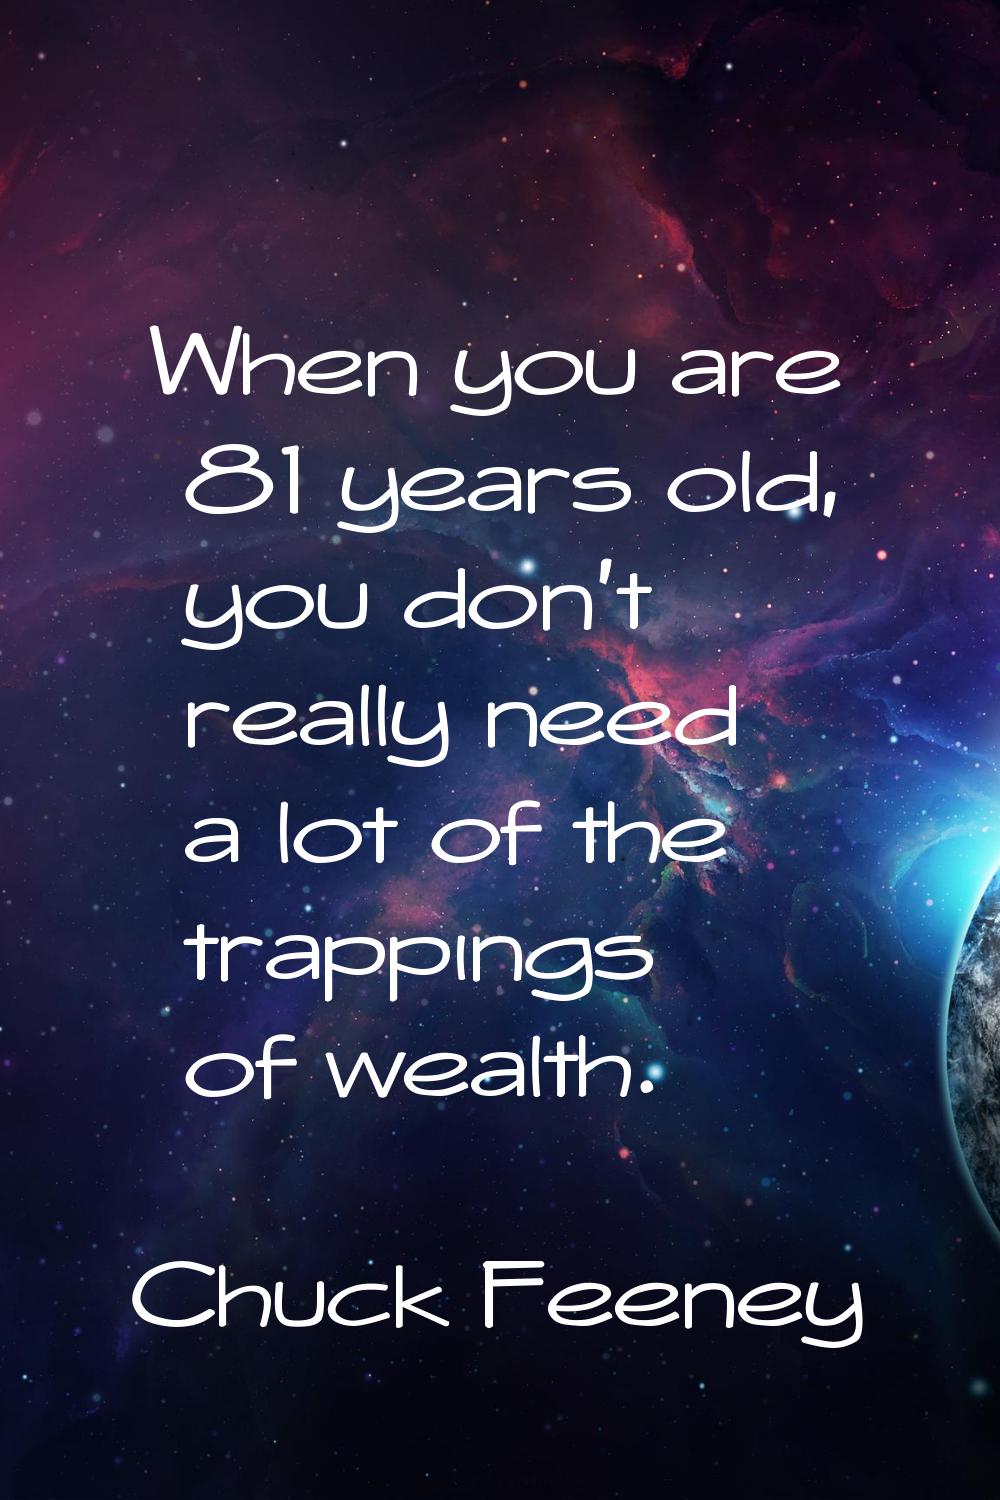 When you are 81 years old, you don't really need a lot of the trappings of wealth.